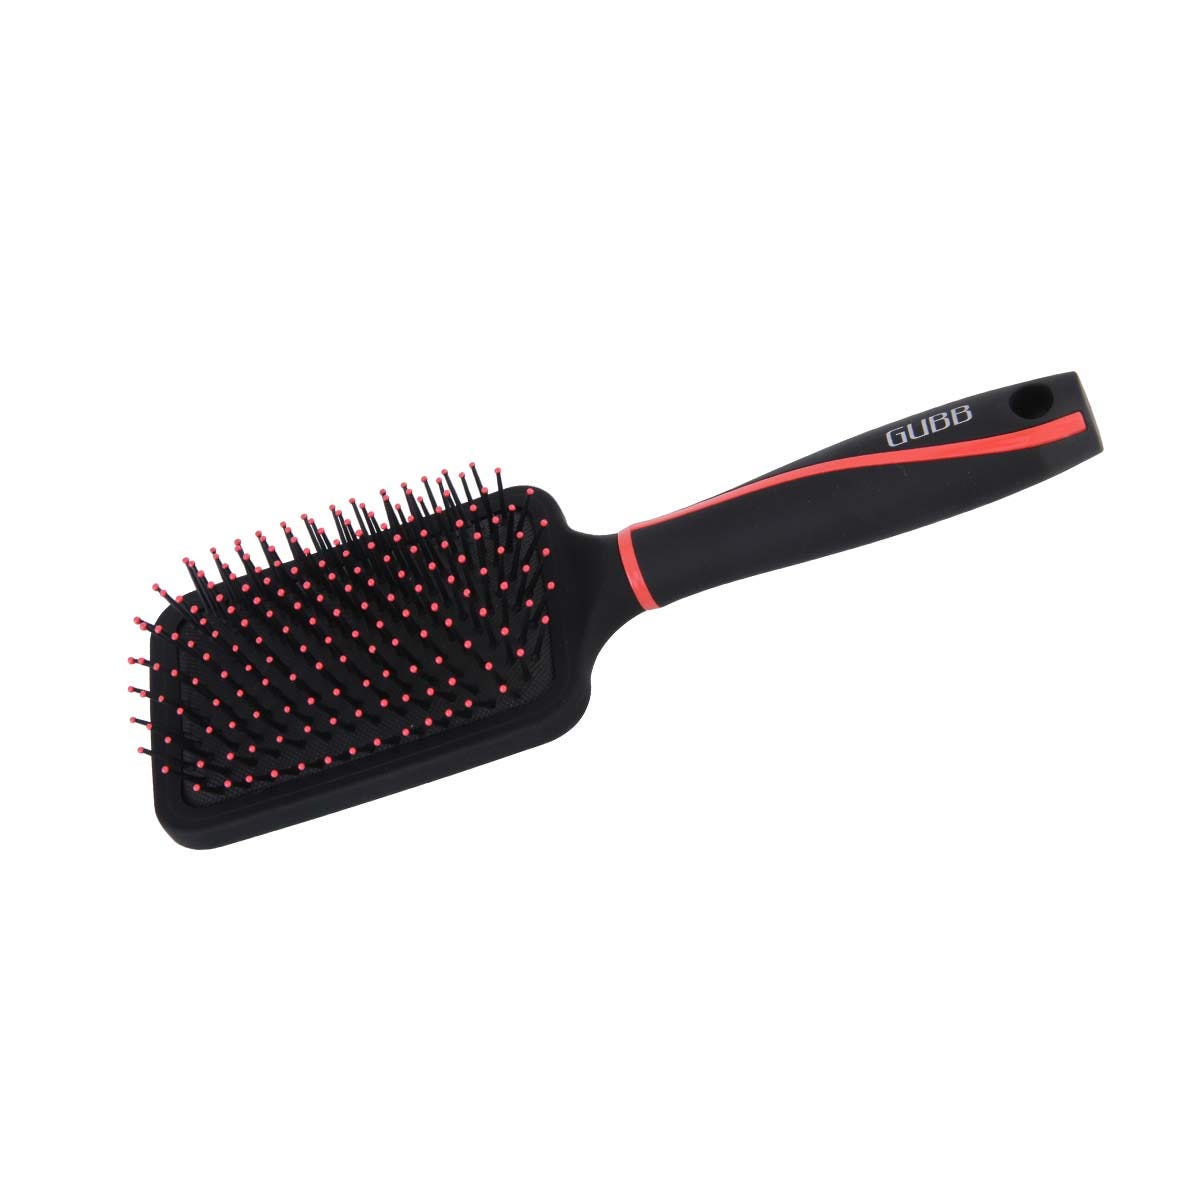 How to clean hair brushes? Step-by-step Guide - Gubb